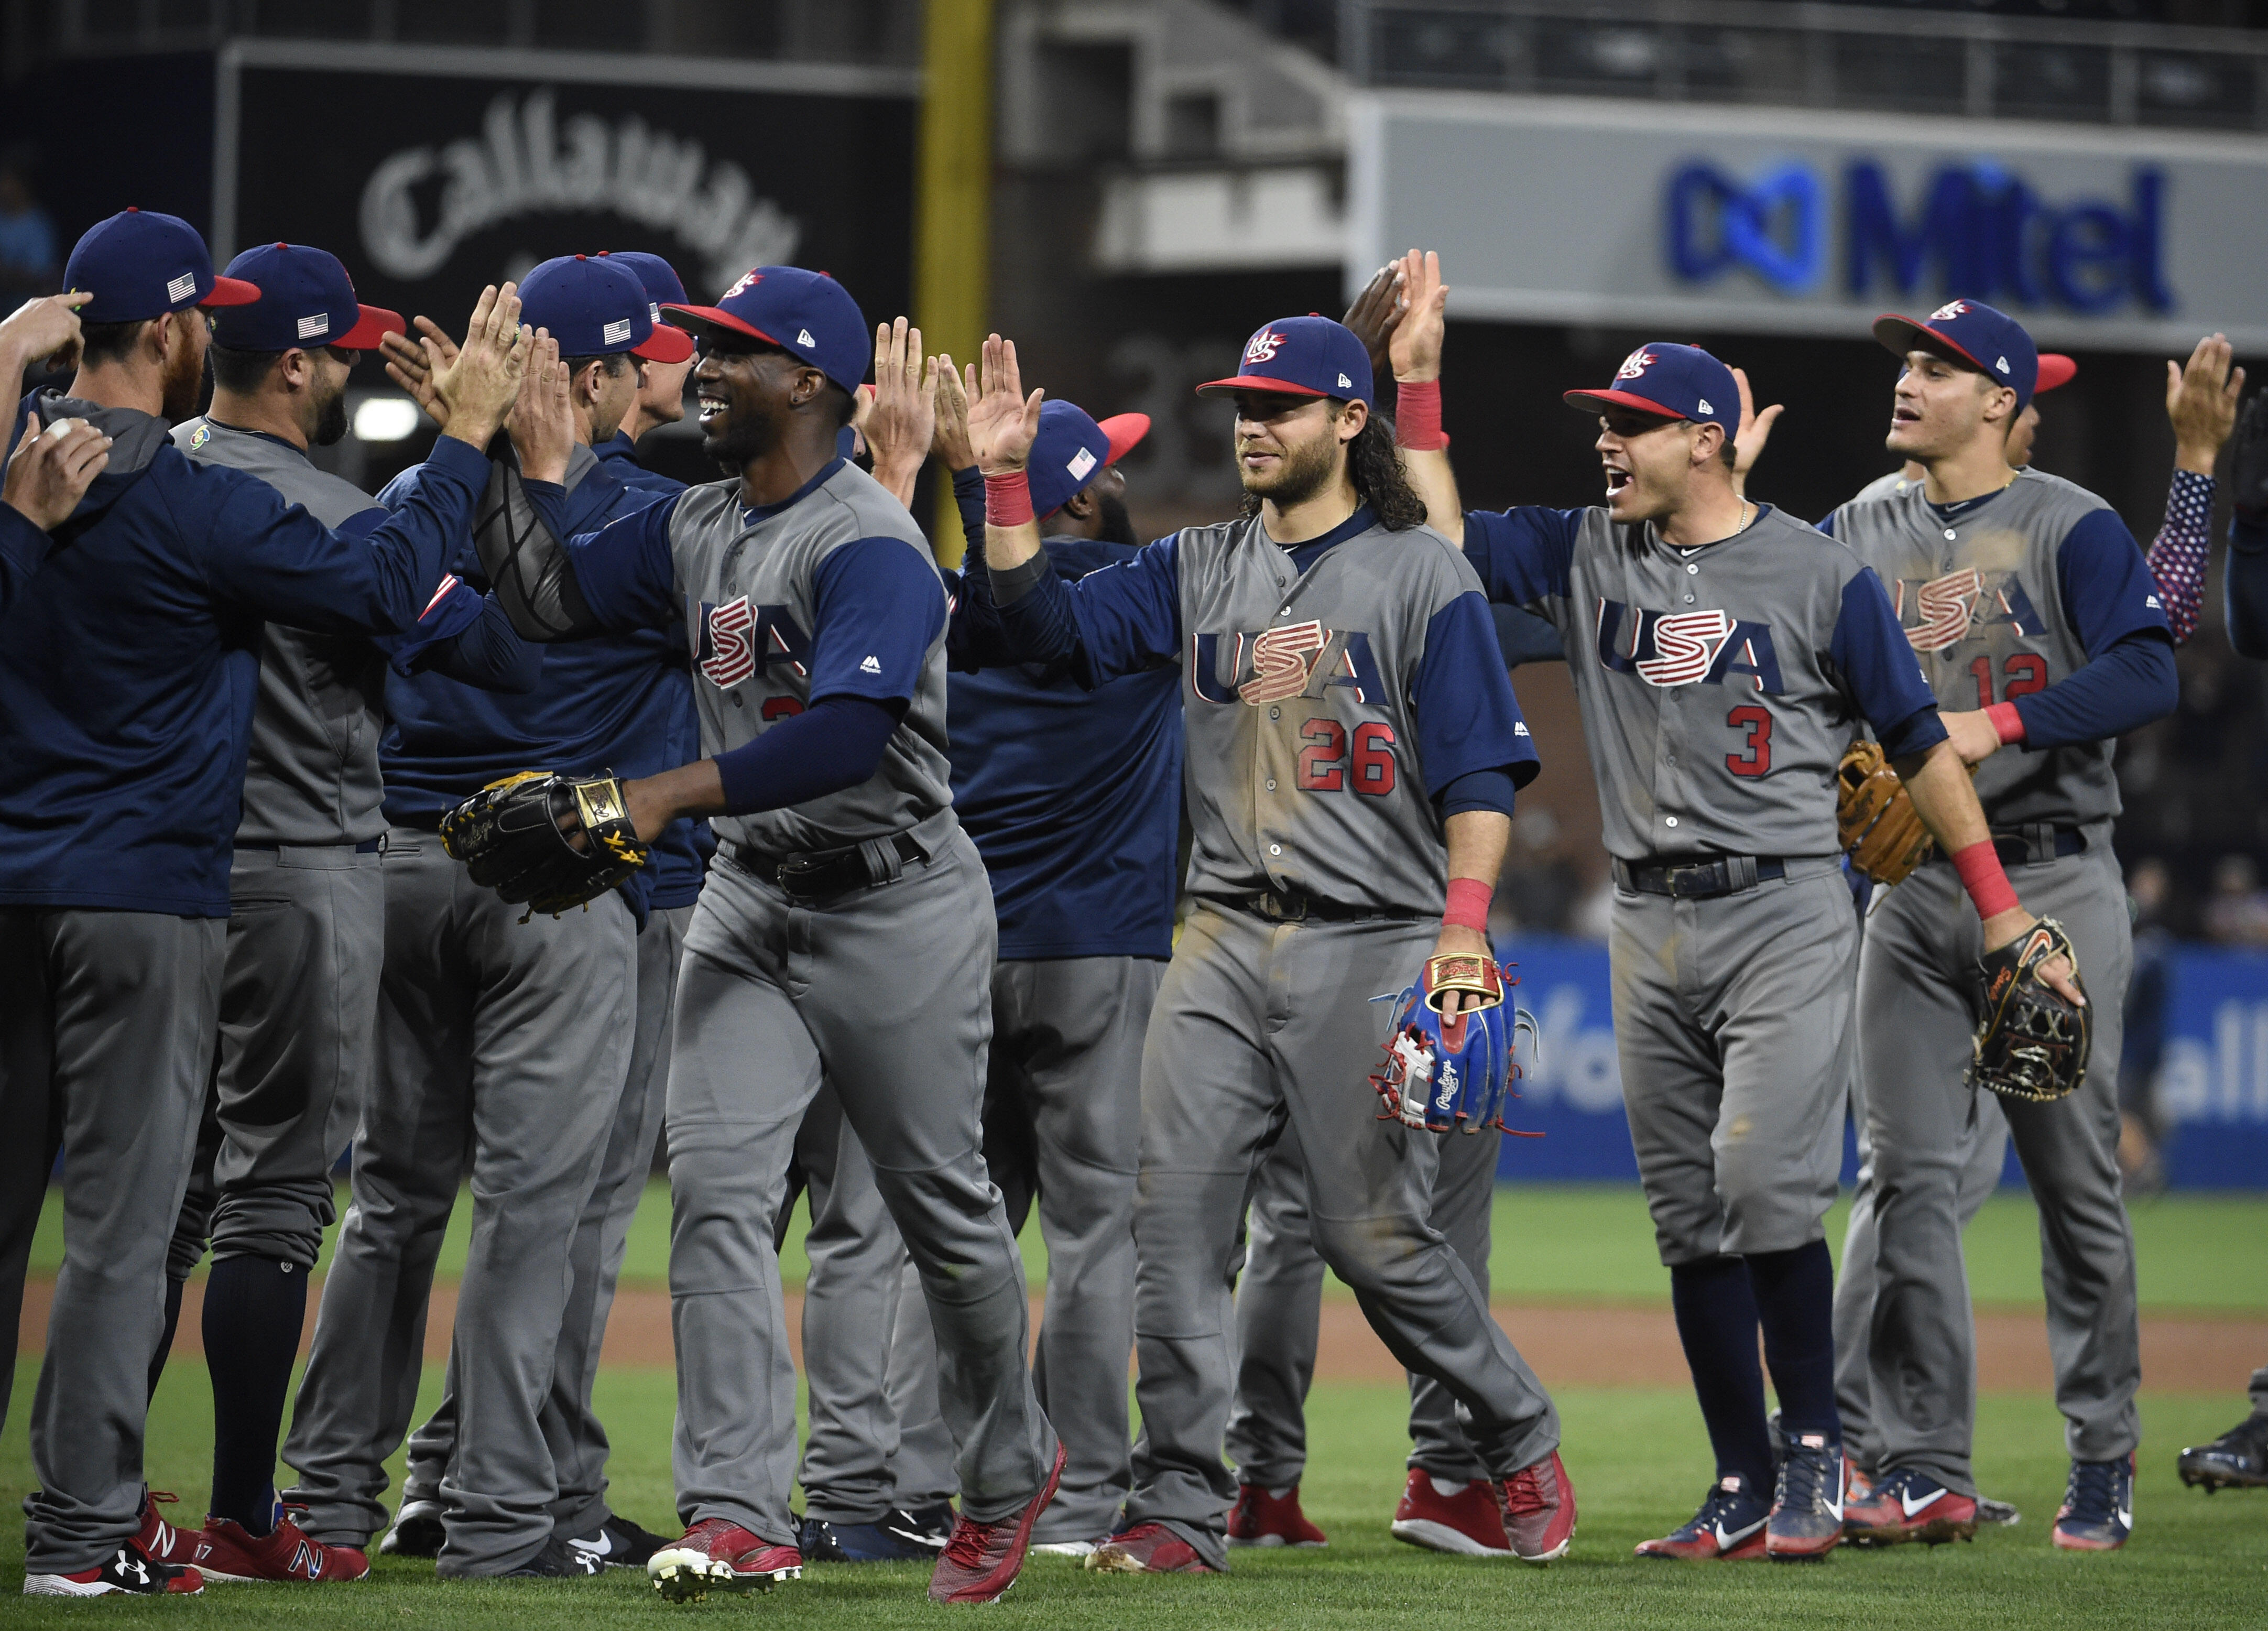 SAN DIEGO, CA - MARCH 18: United States players celebrate after beating the Dominican Republic 6-3 in World Baseball Classic Pool F Game Six at PETCO Park on March 18, 2017 in San Diego, California.  (Photo by Denis Poroy/Getty Images)